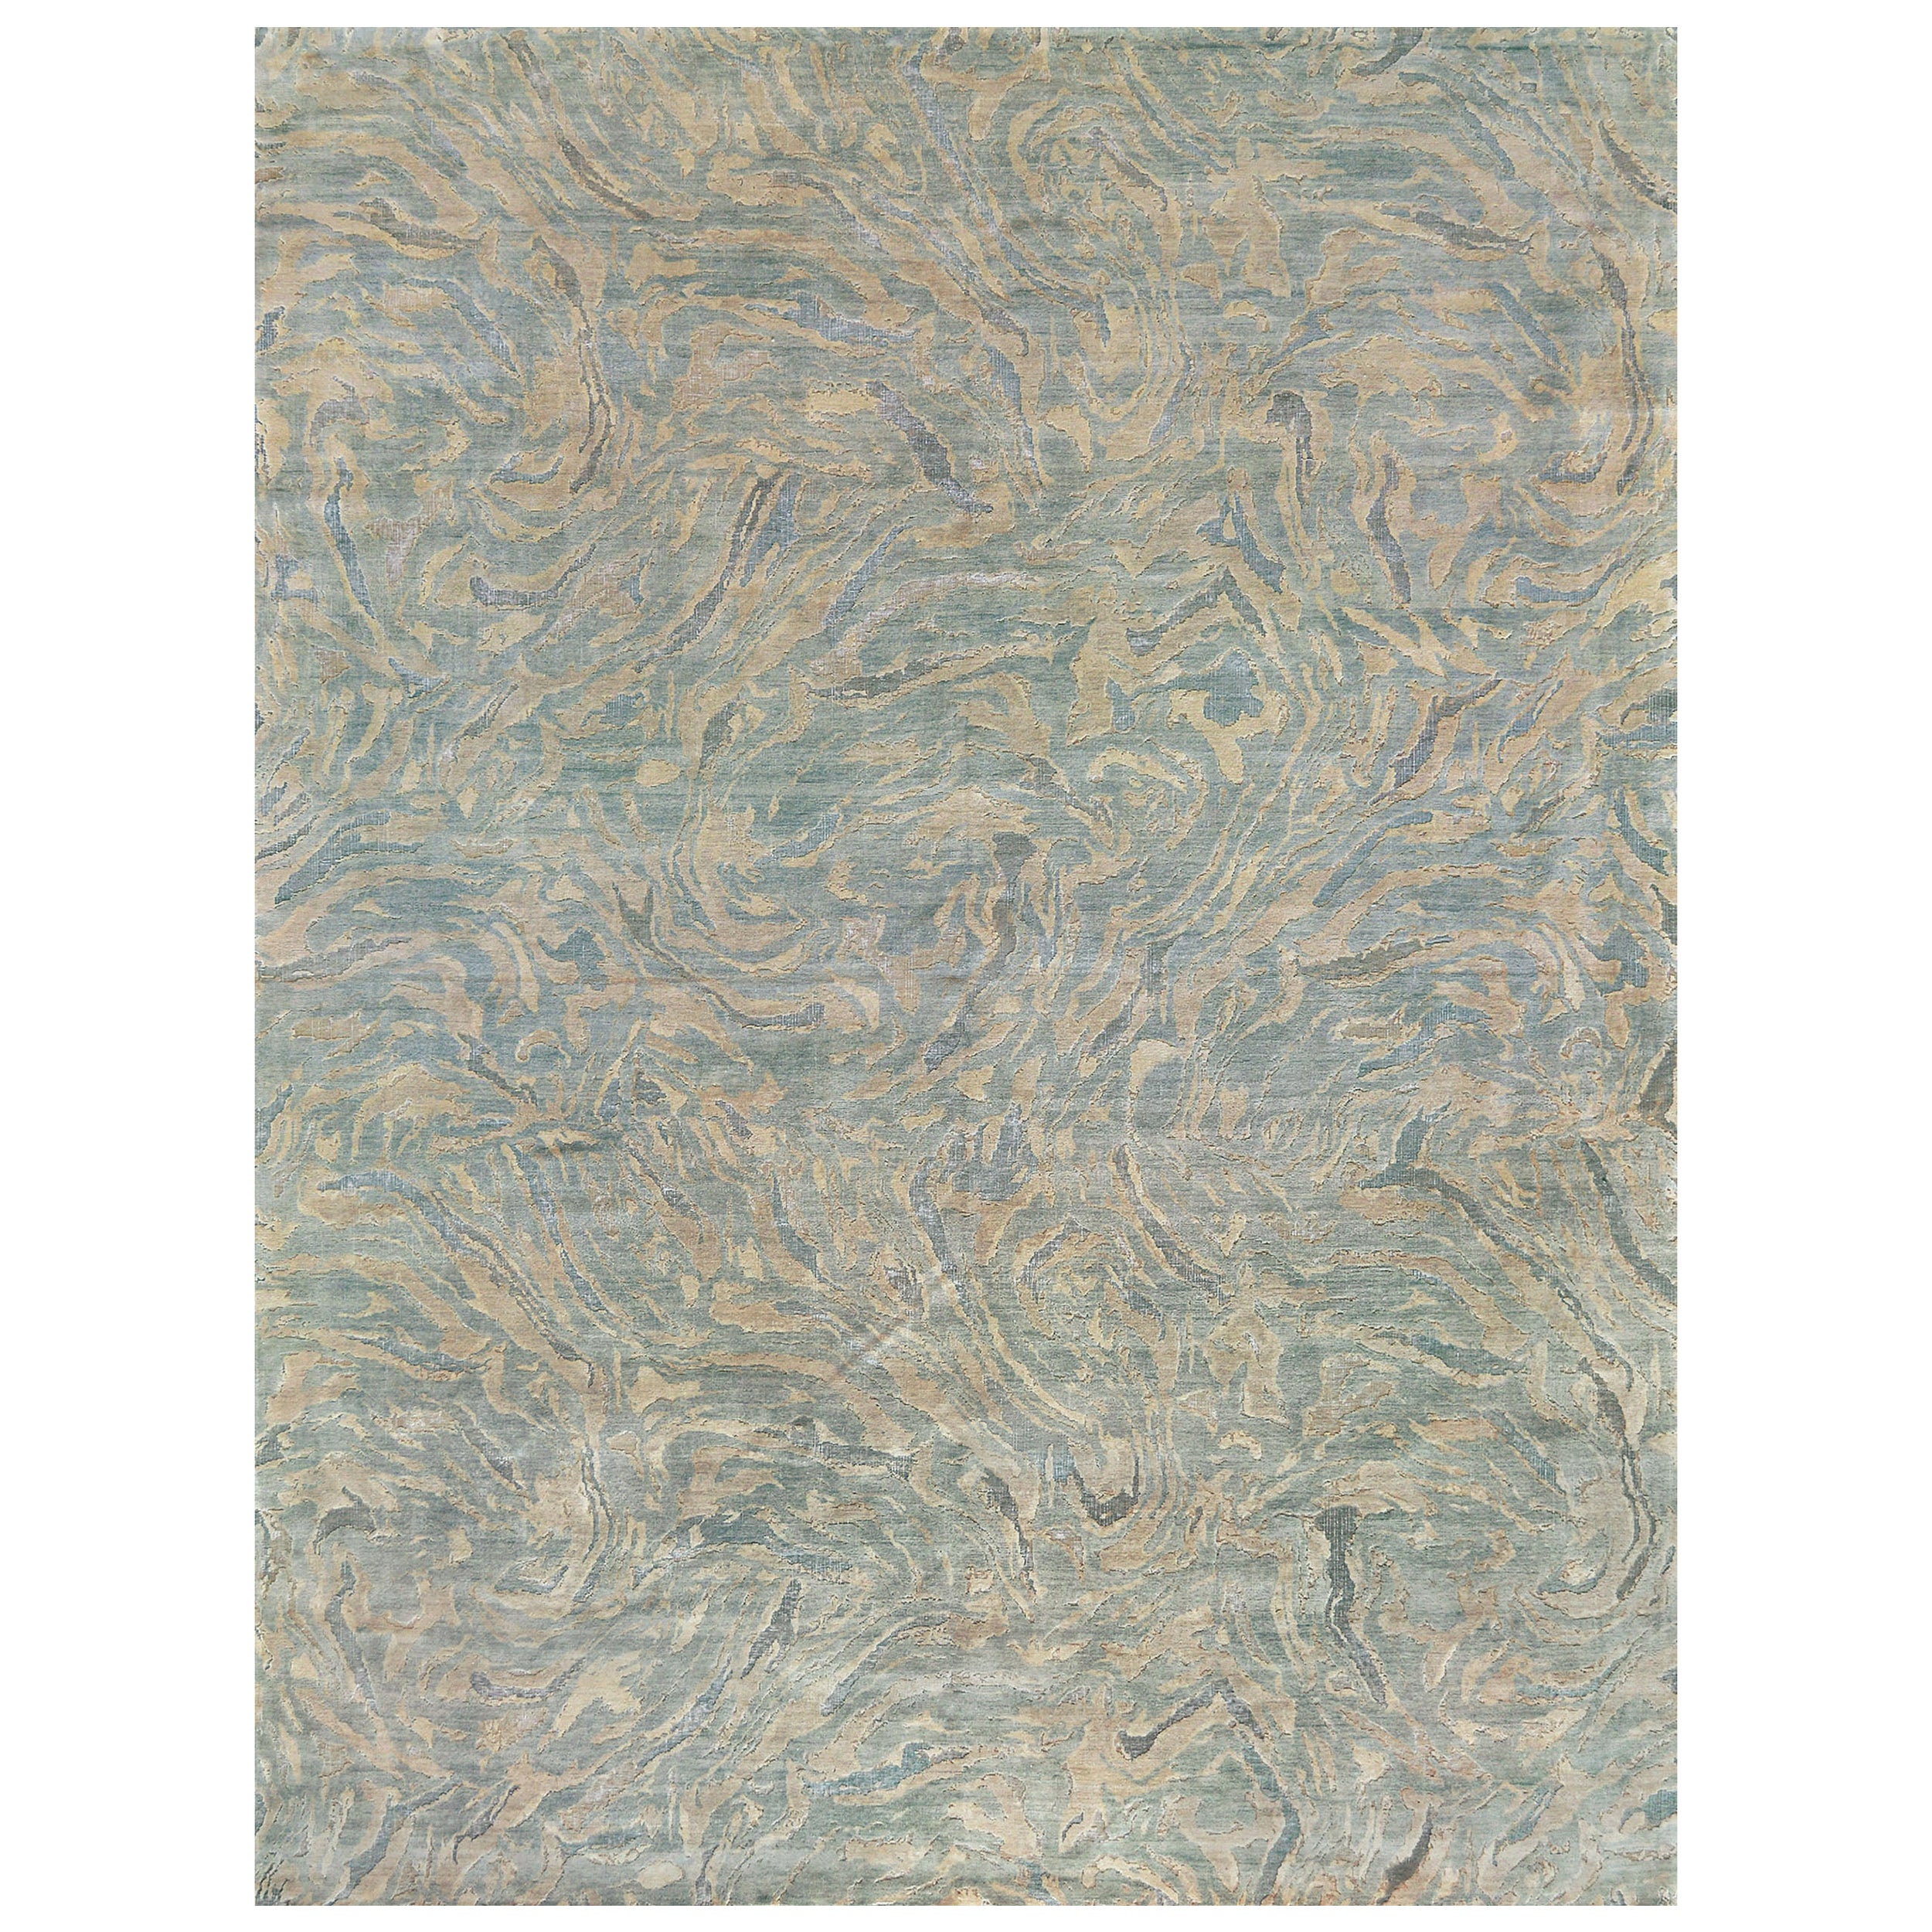 Handwoven High-Low Wool Abstract Rug